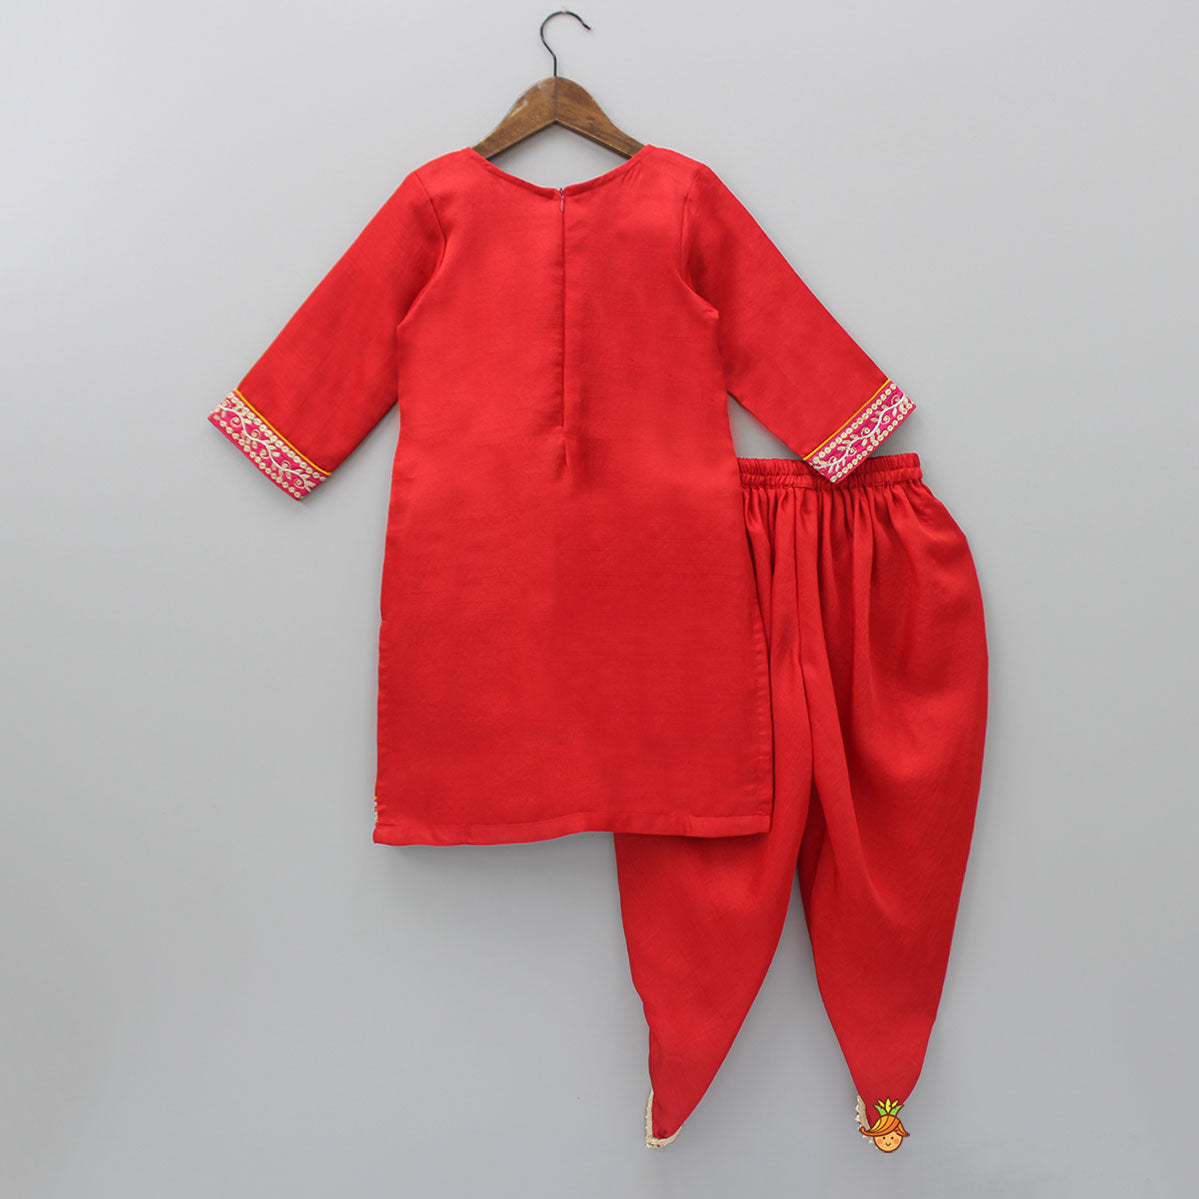 Exquisite Embroidered Red Kurti And Tulip Pant With Dupatta